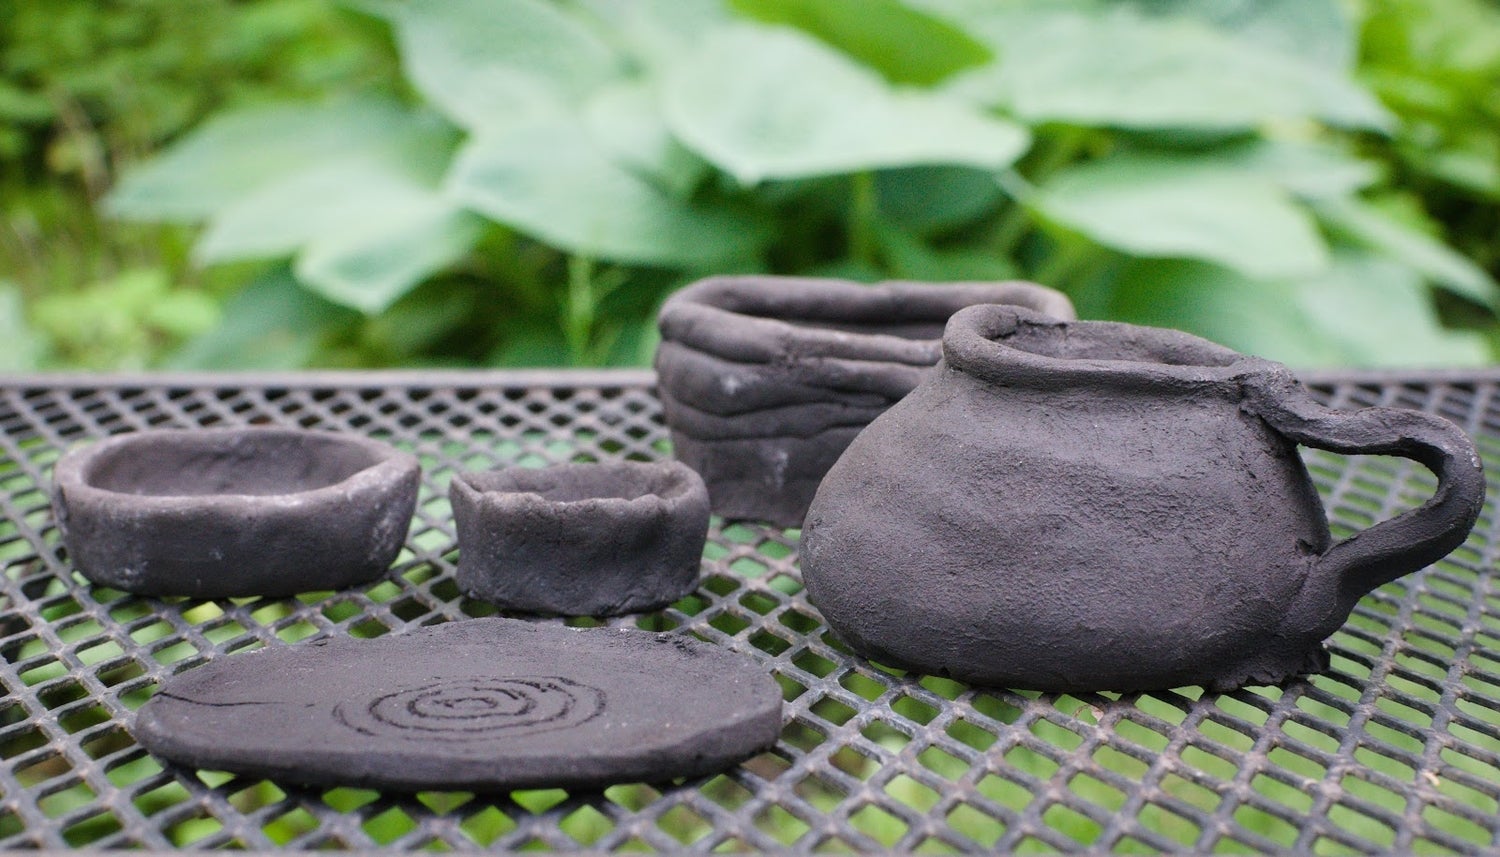 How to make pottery from scratch | Popular Science